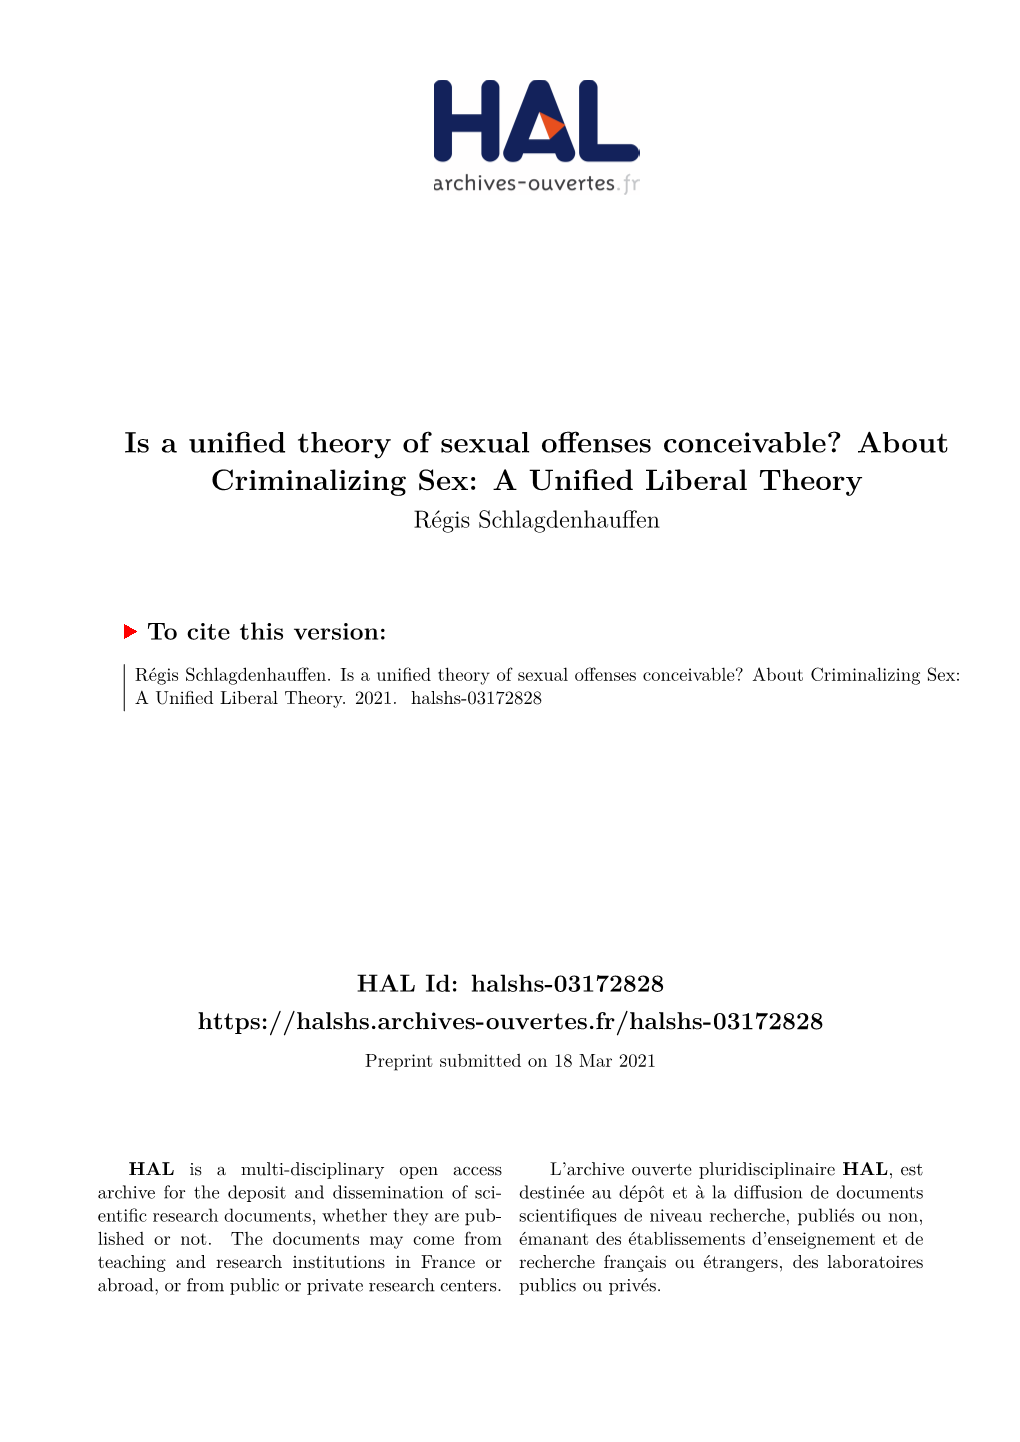 Is a Unified Theory of Sexual Offenses Conceivable? About Criminalizing Sex: a Unified Liberal Theory Régis Schlagdenhauffen